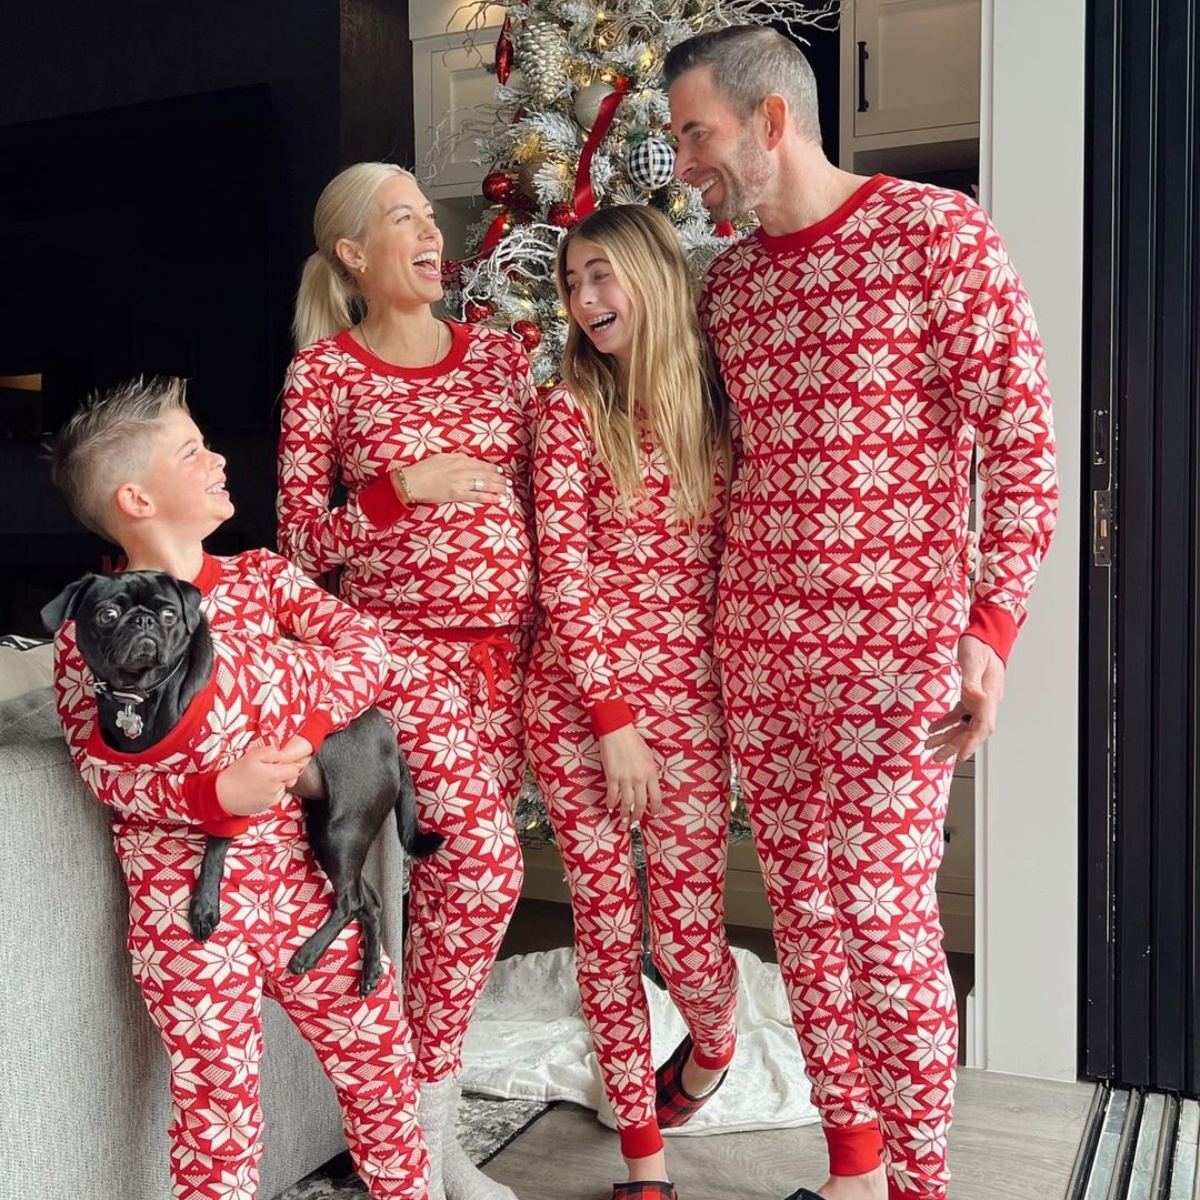 Where to Find the Best Matching Family Christmas Pajamas